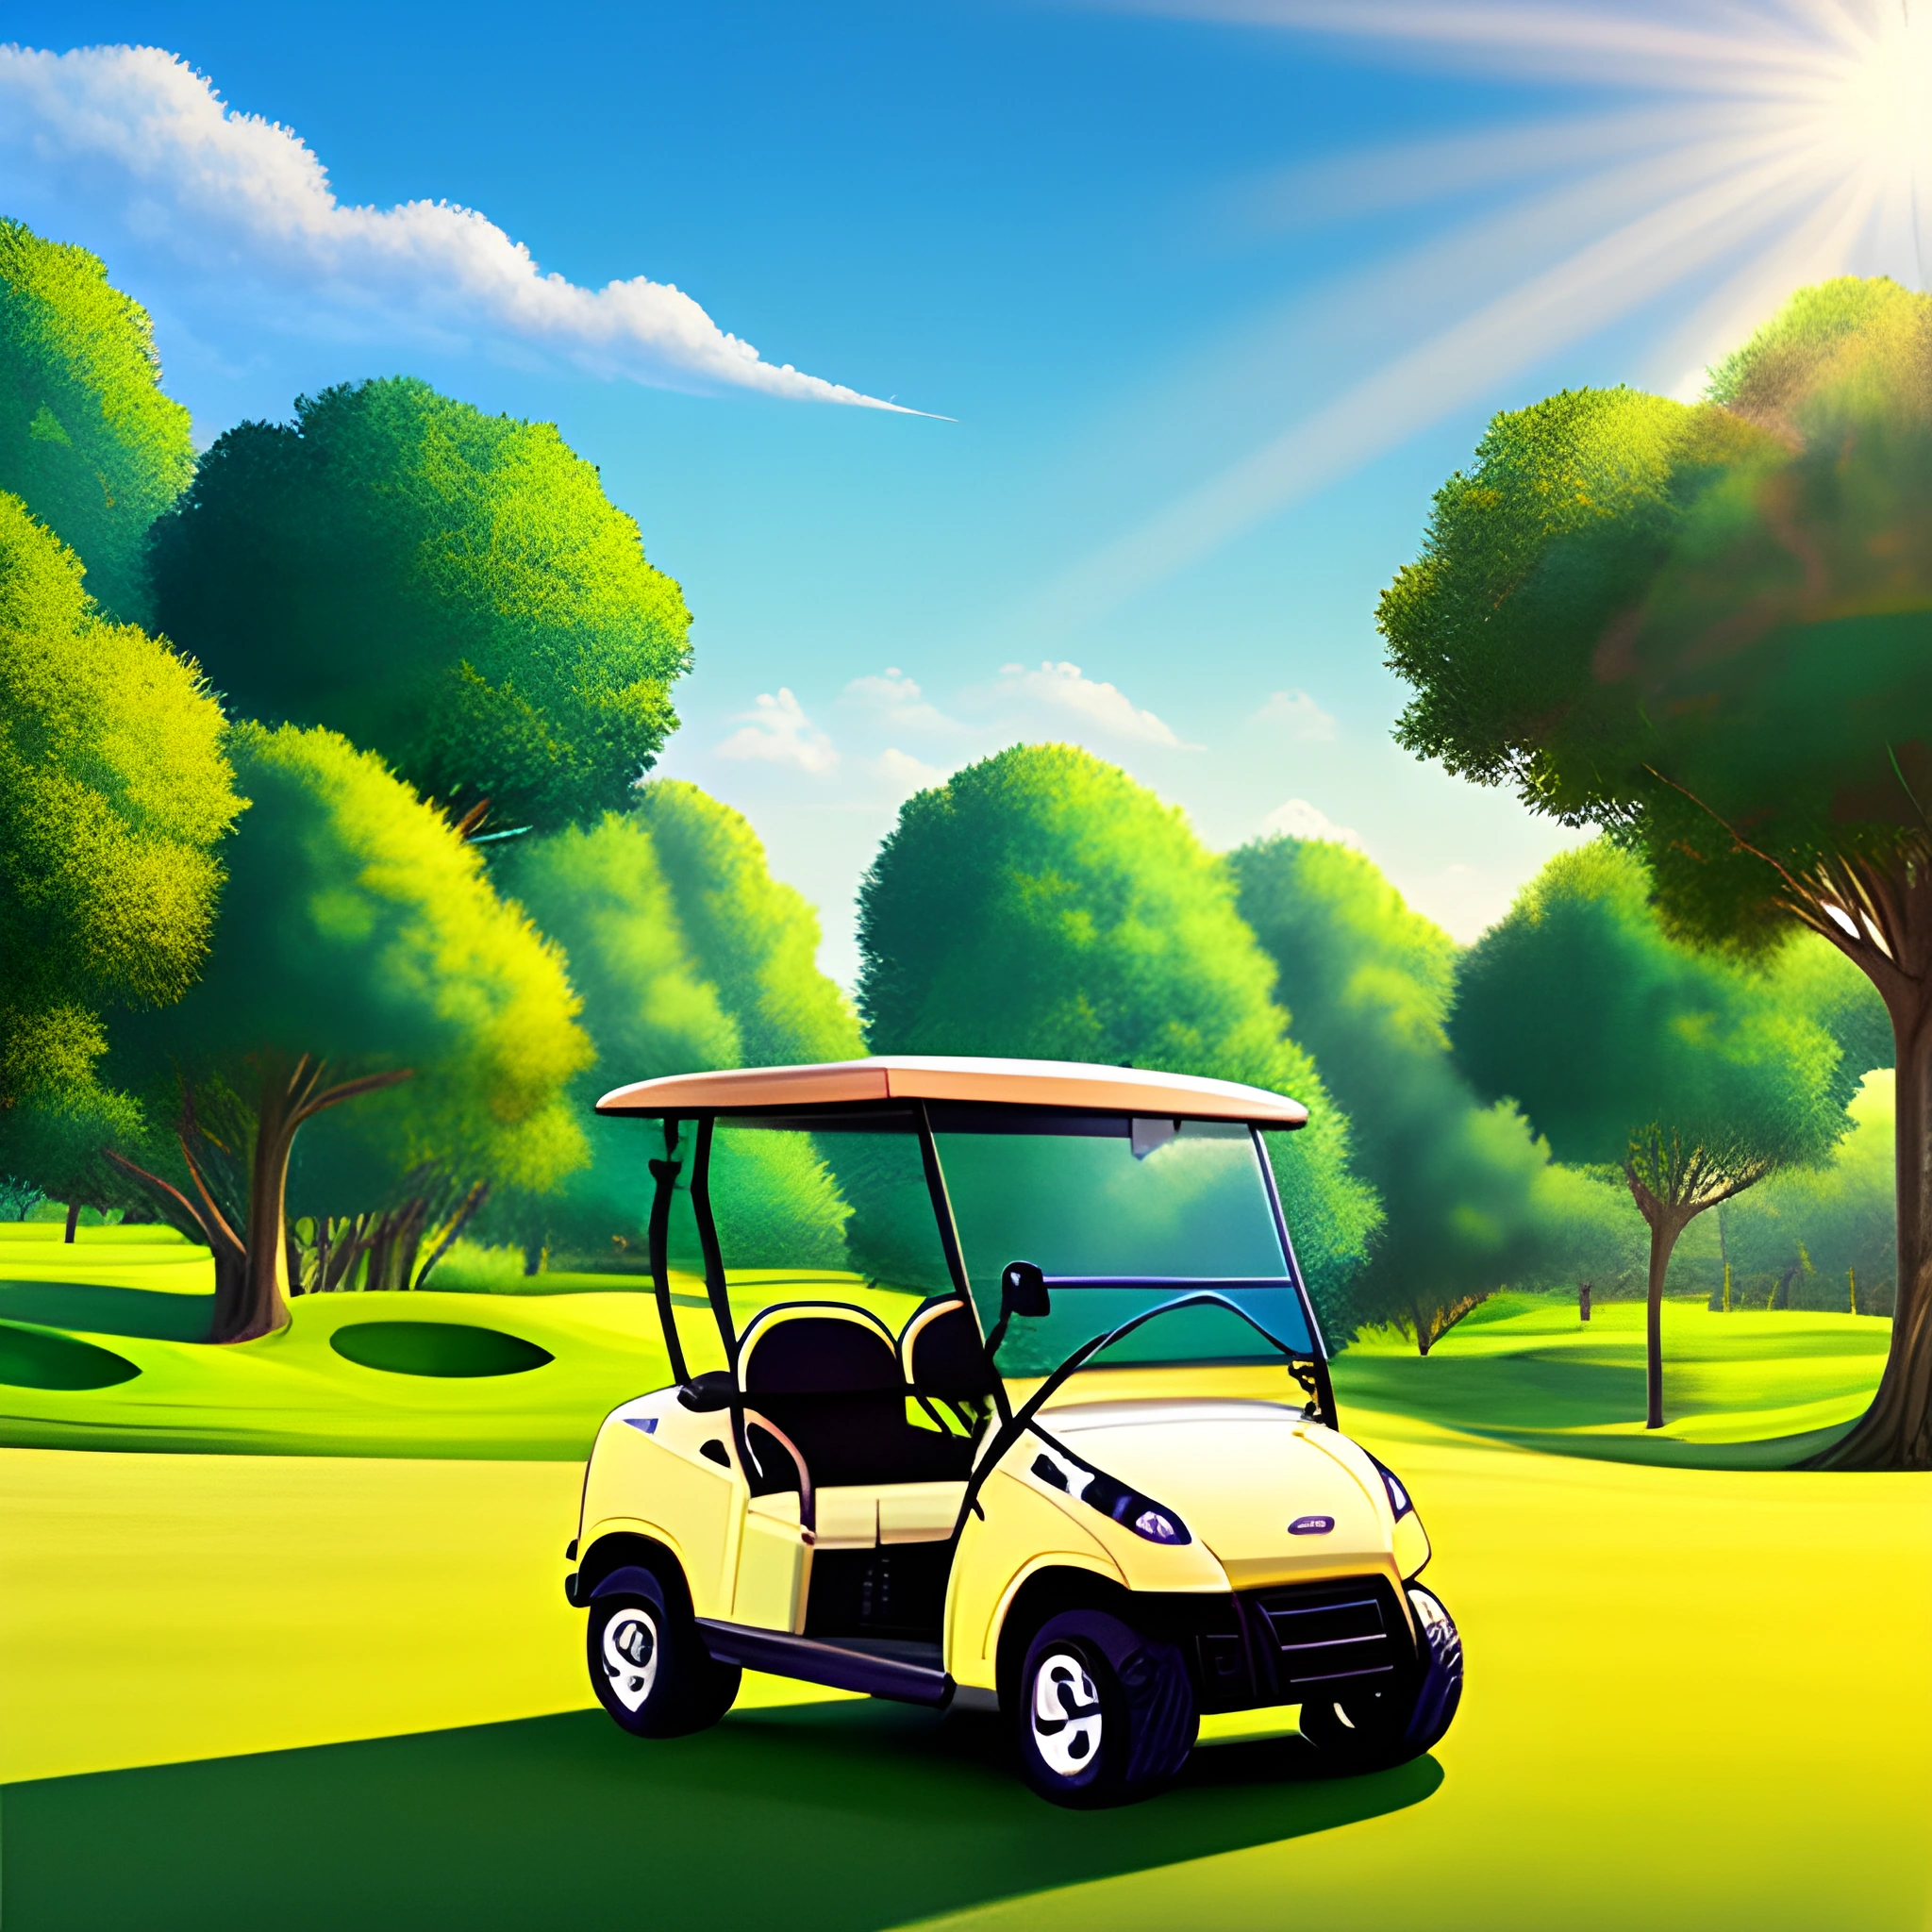 cartoon golf cart on a green golf course with trees and sun